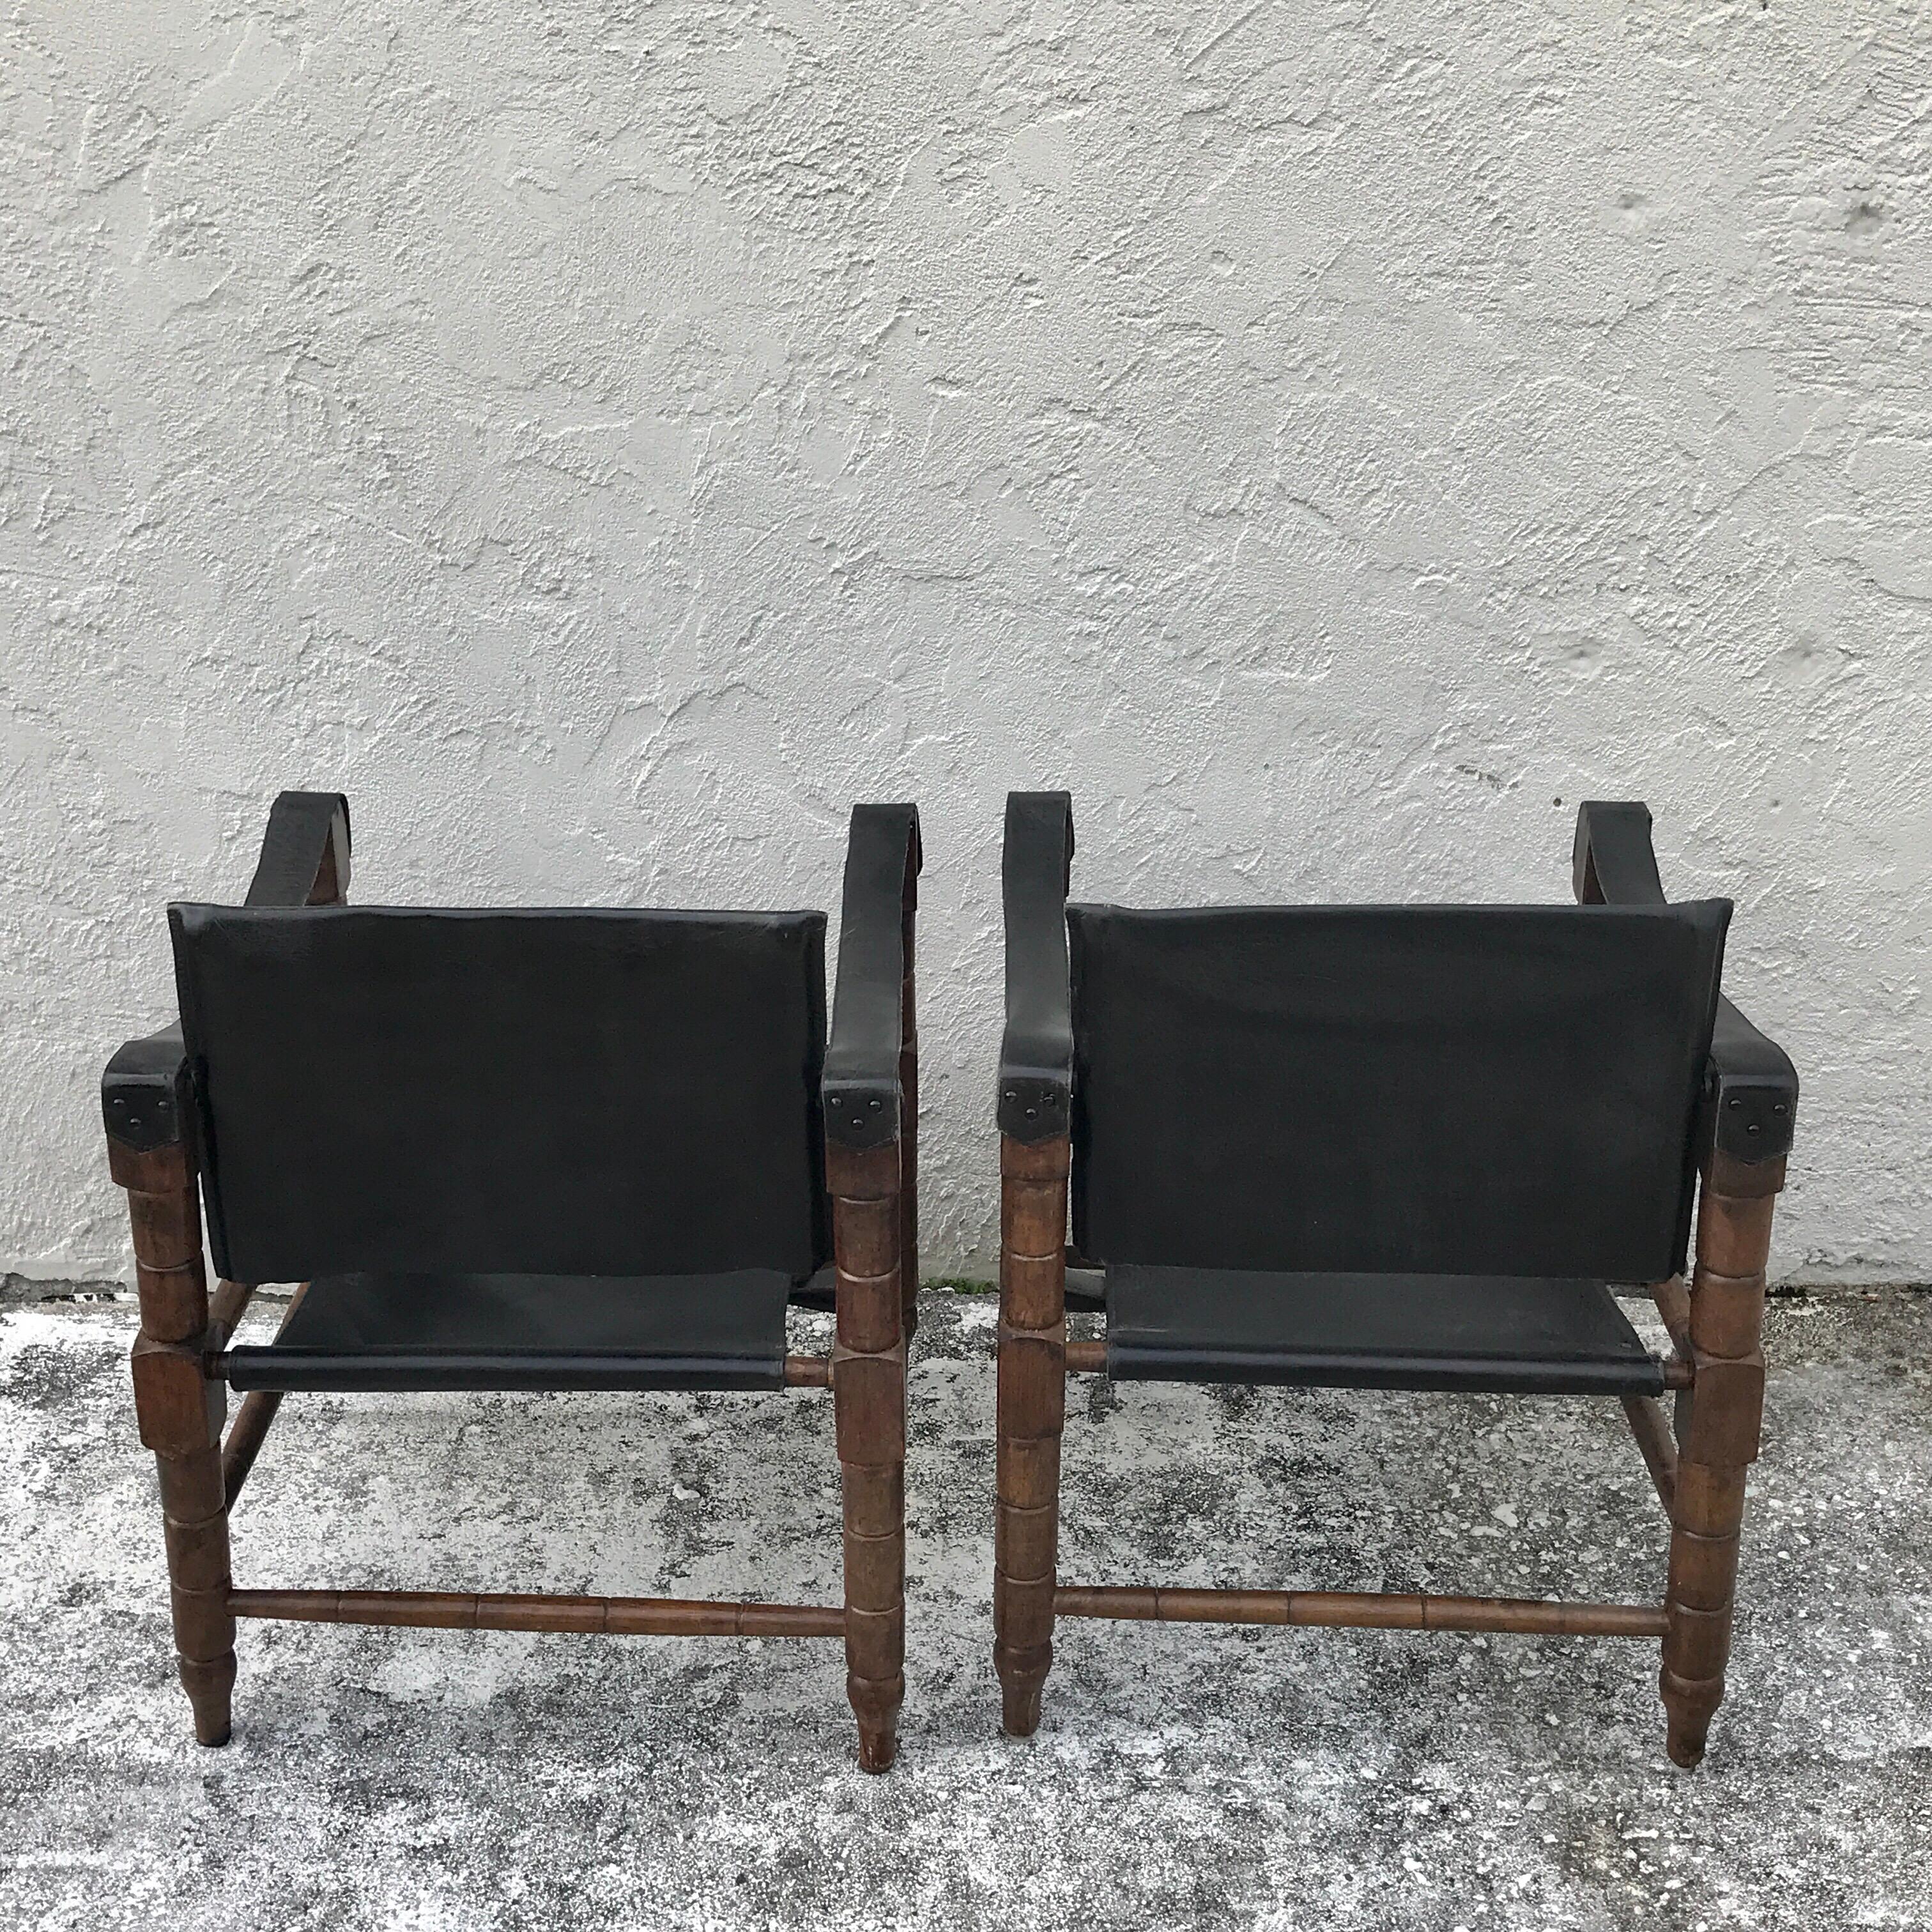 Pair of Syrian Leather Campaign / Safari Chairs 1